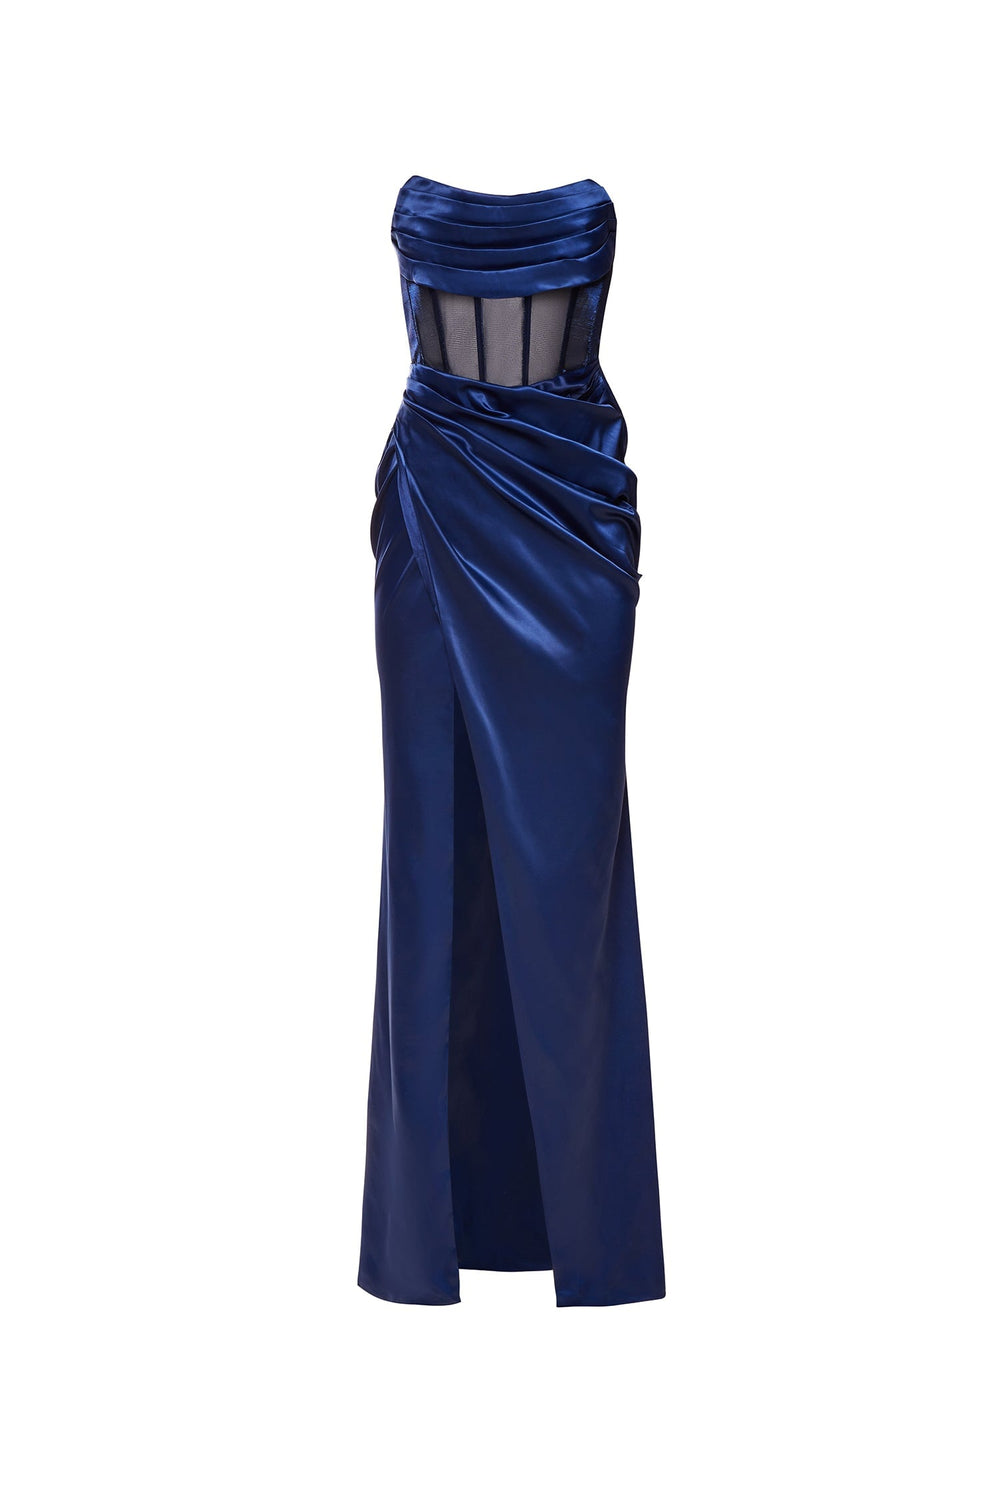 Ingrid - Navy Satin Gown with Sheer Boned Bodice and Side Slit